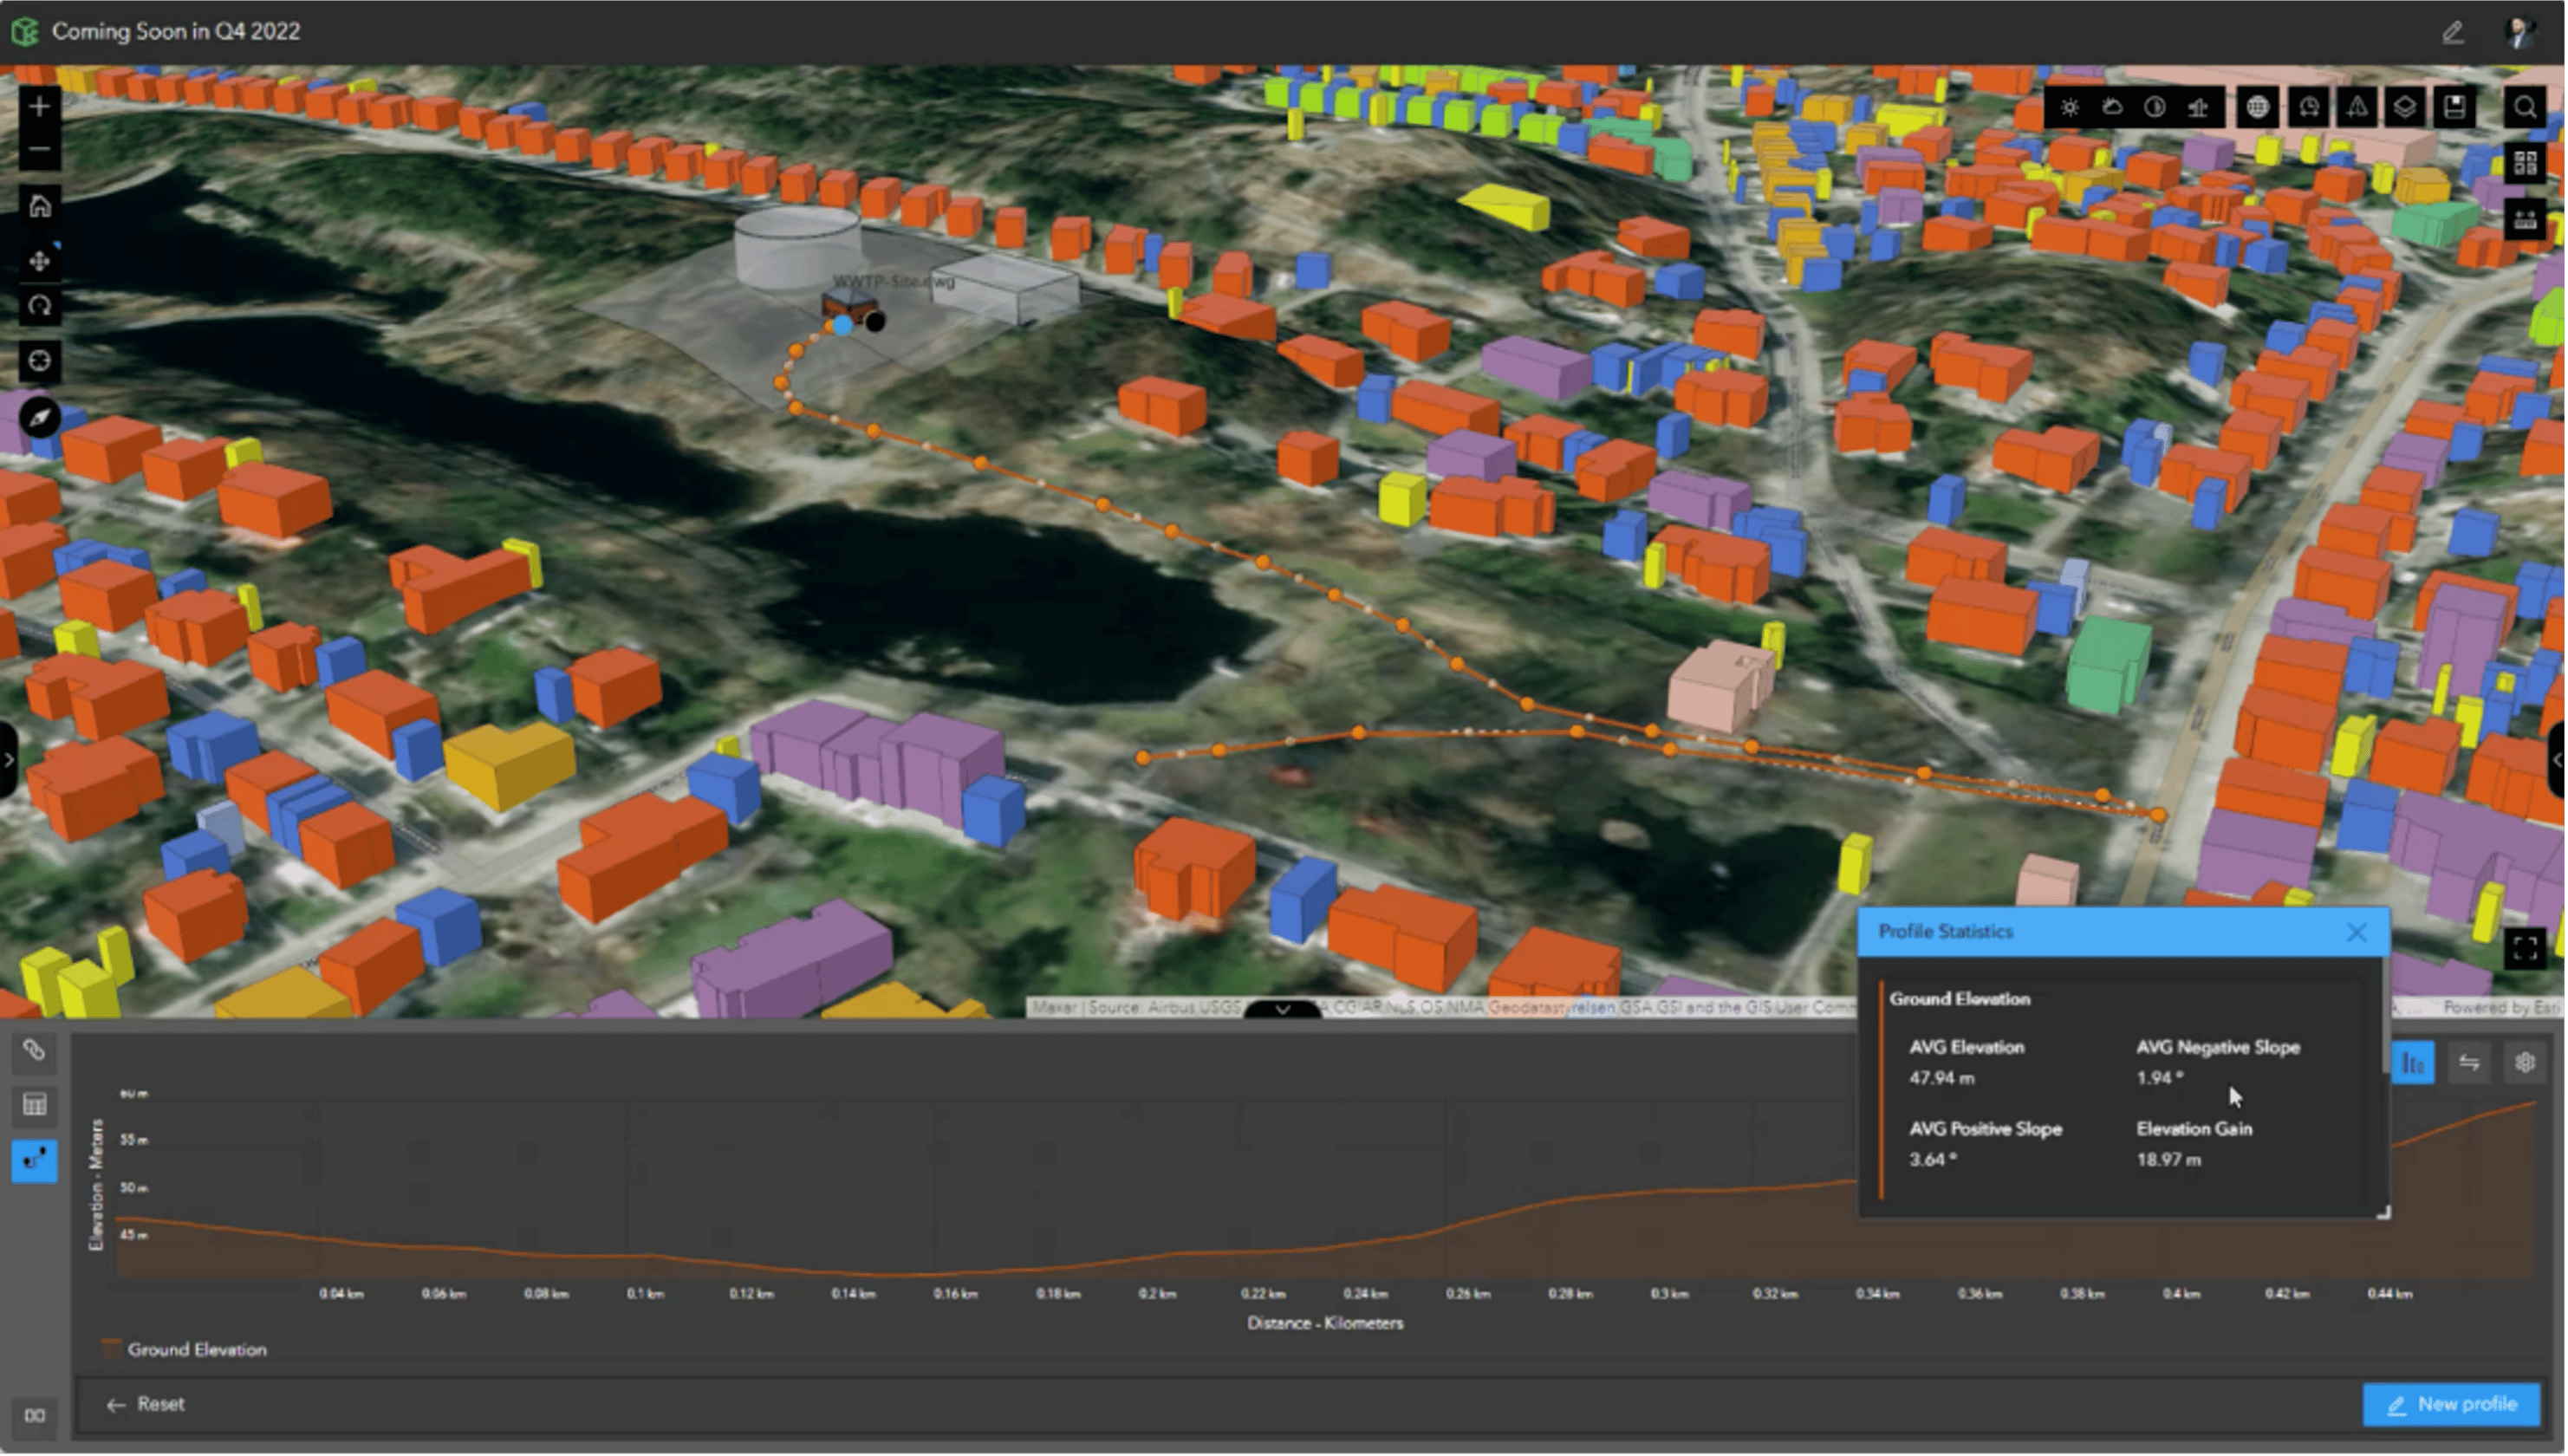 ArcGIS GeoBIM now offers features to generate elevation profiles based on paths created by drawing or selecting lines in 2D web maps or 3D scenes.